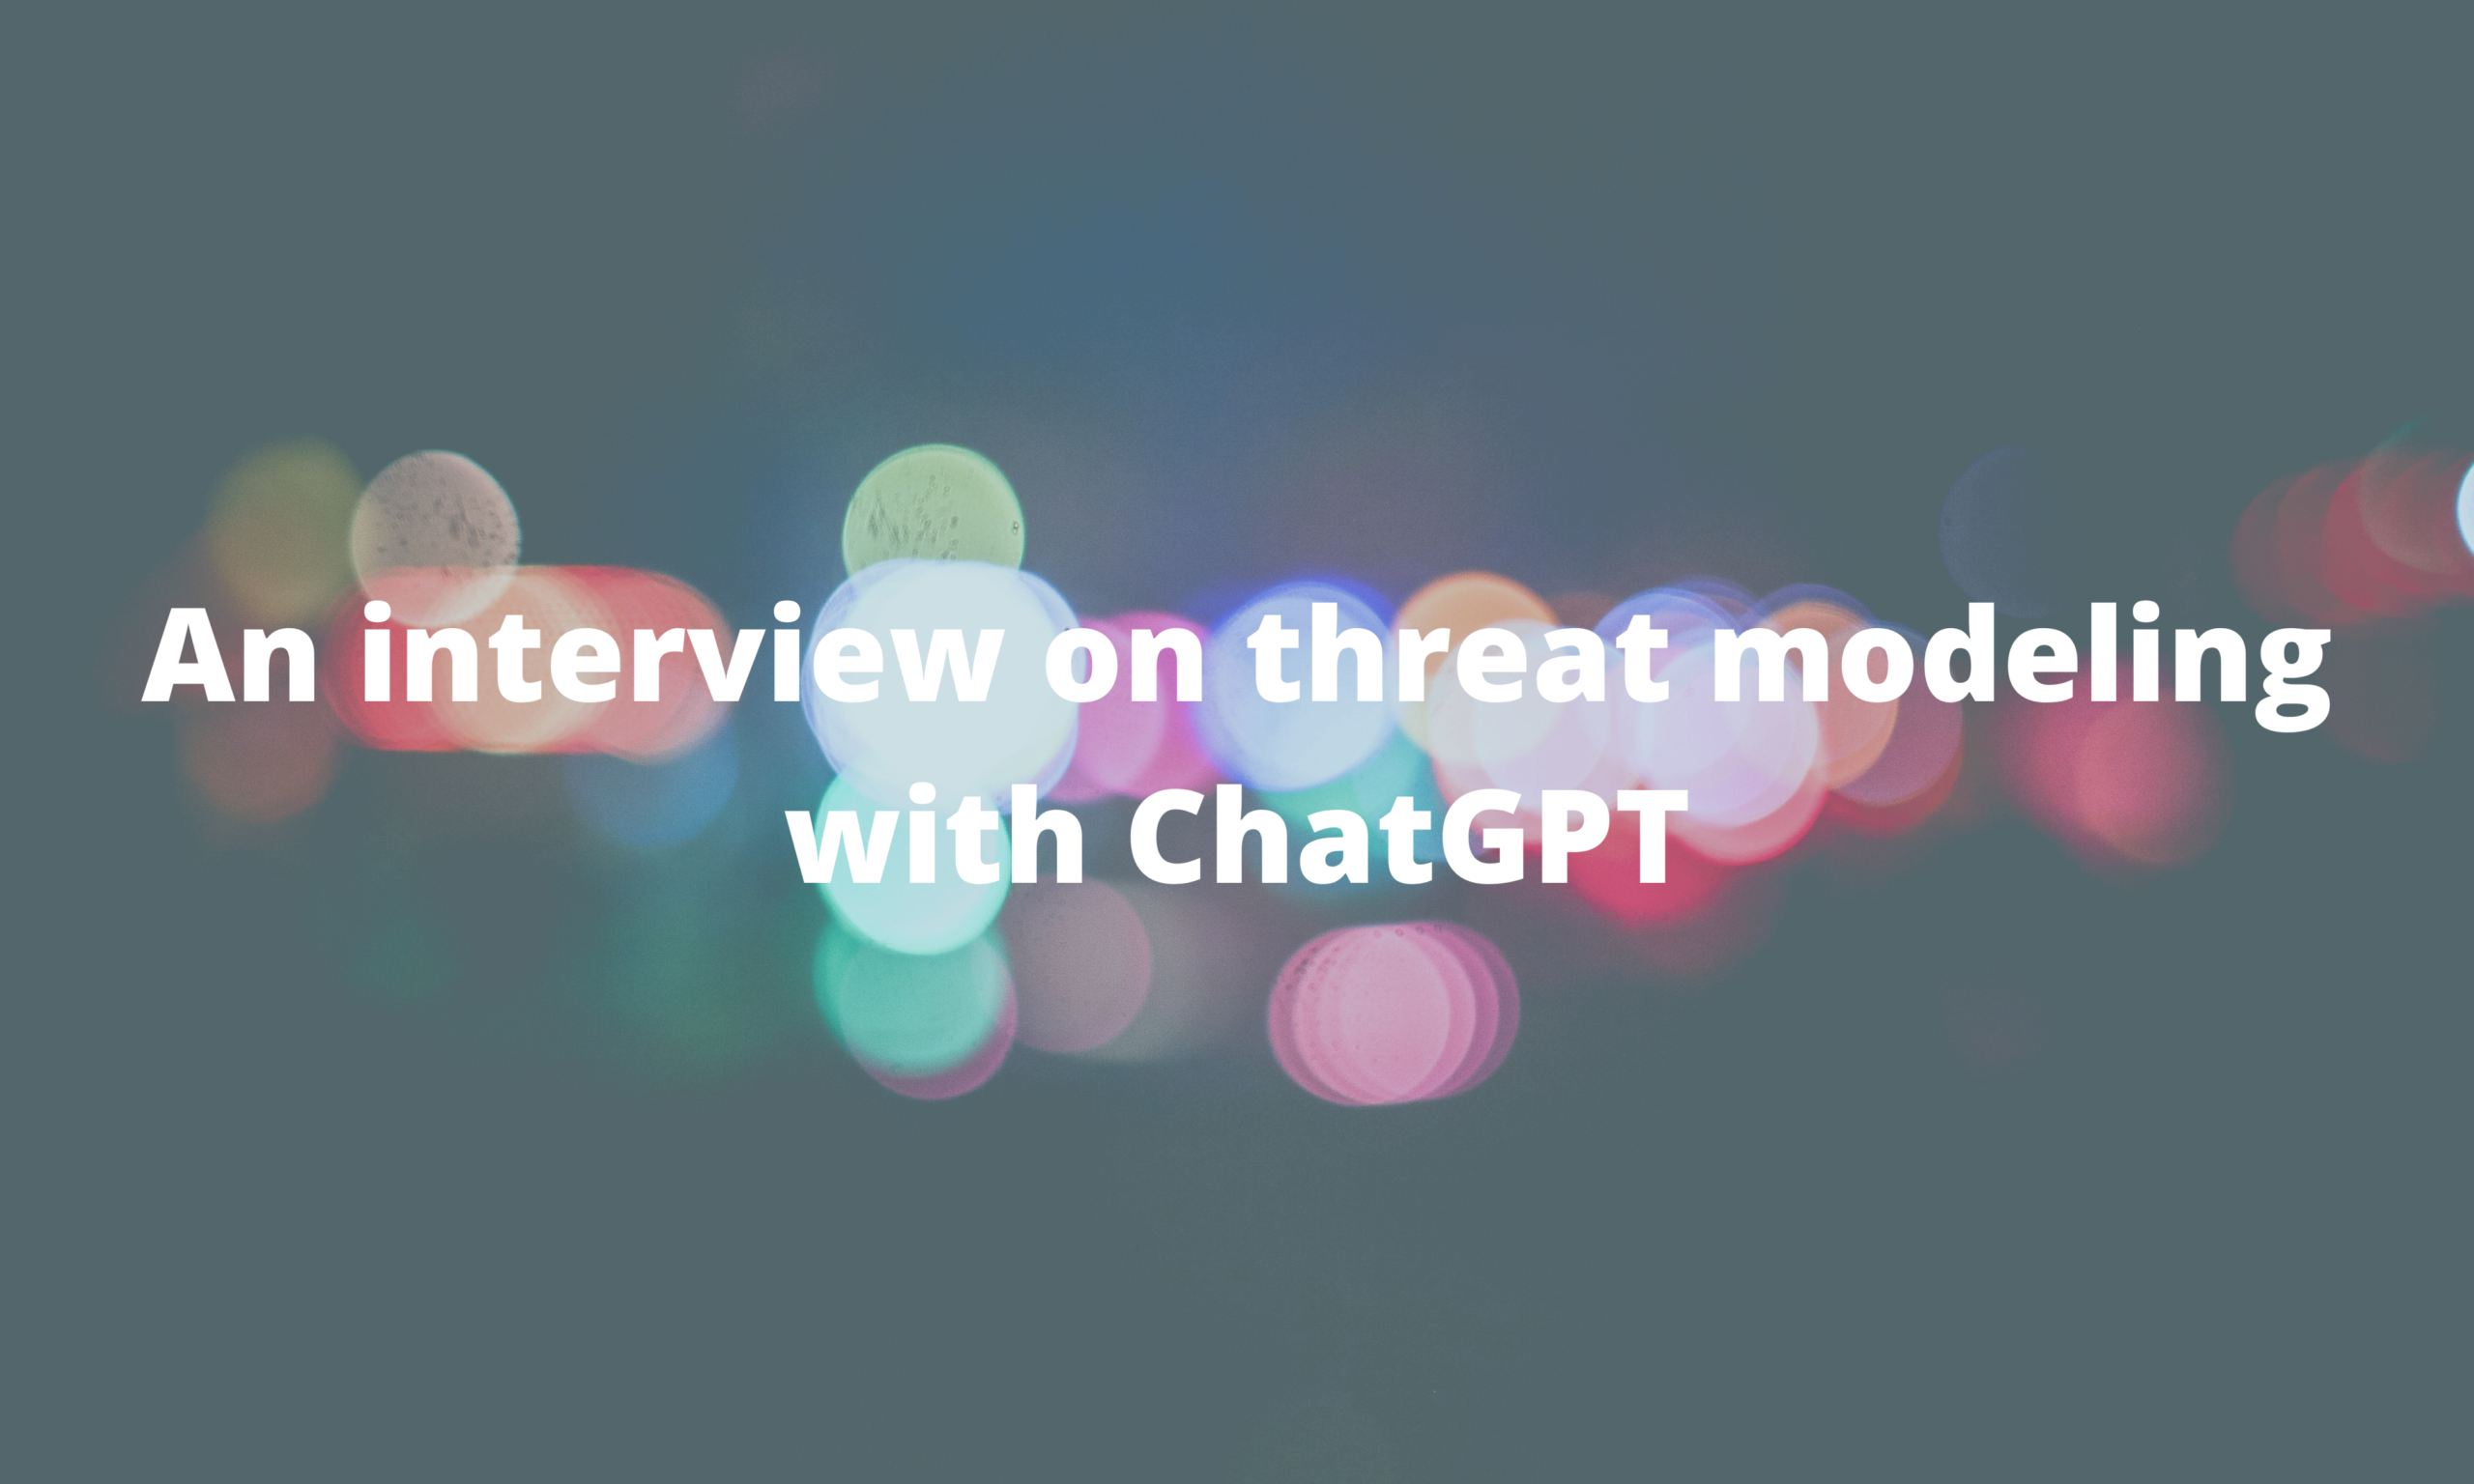 An interview on threat modeling with ChatGPT